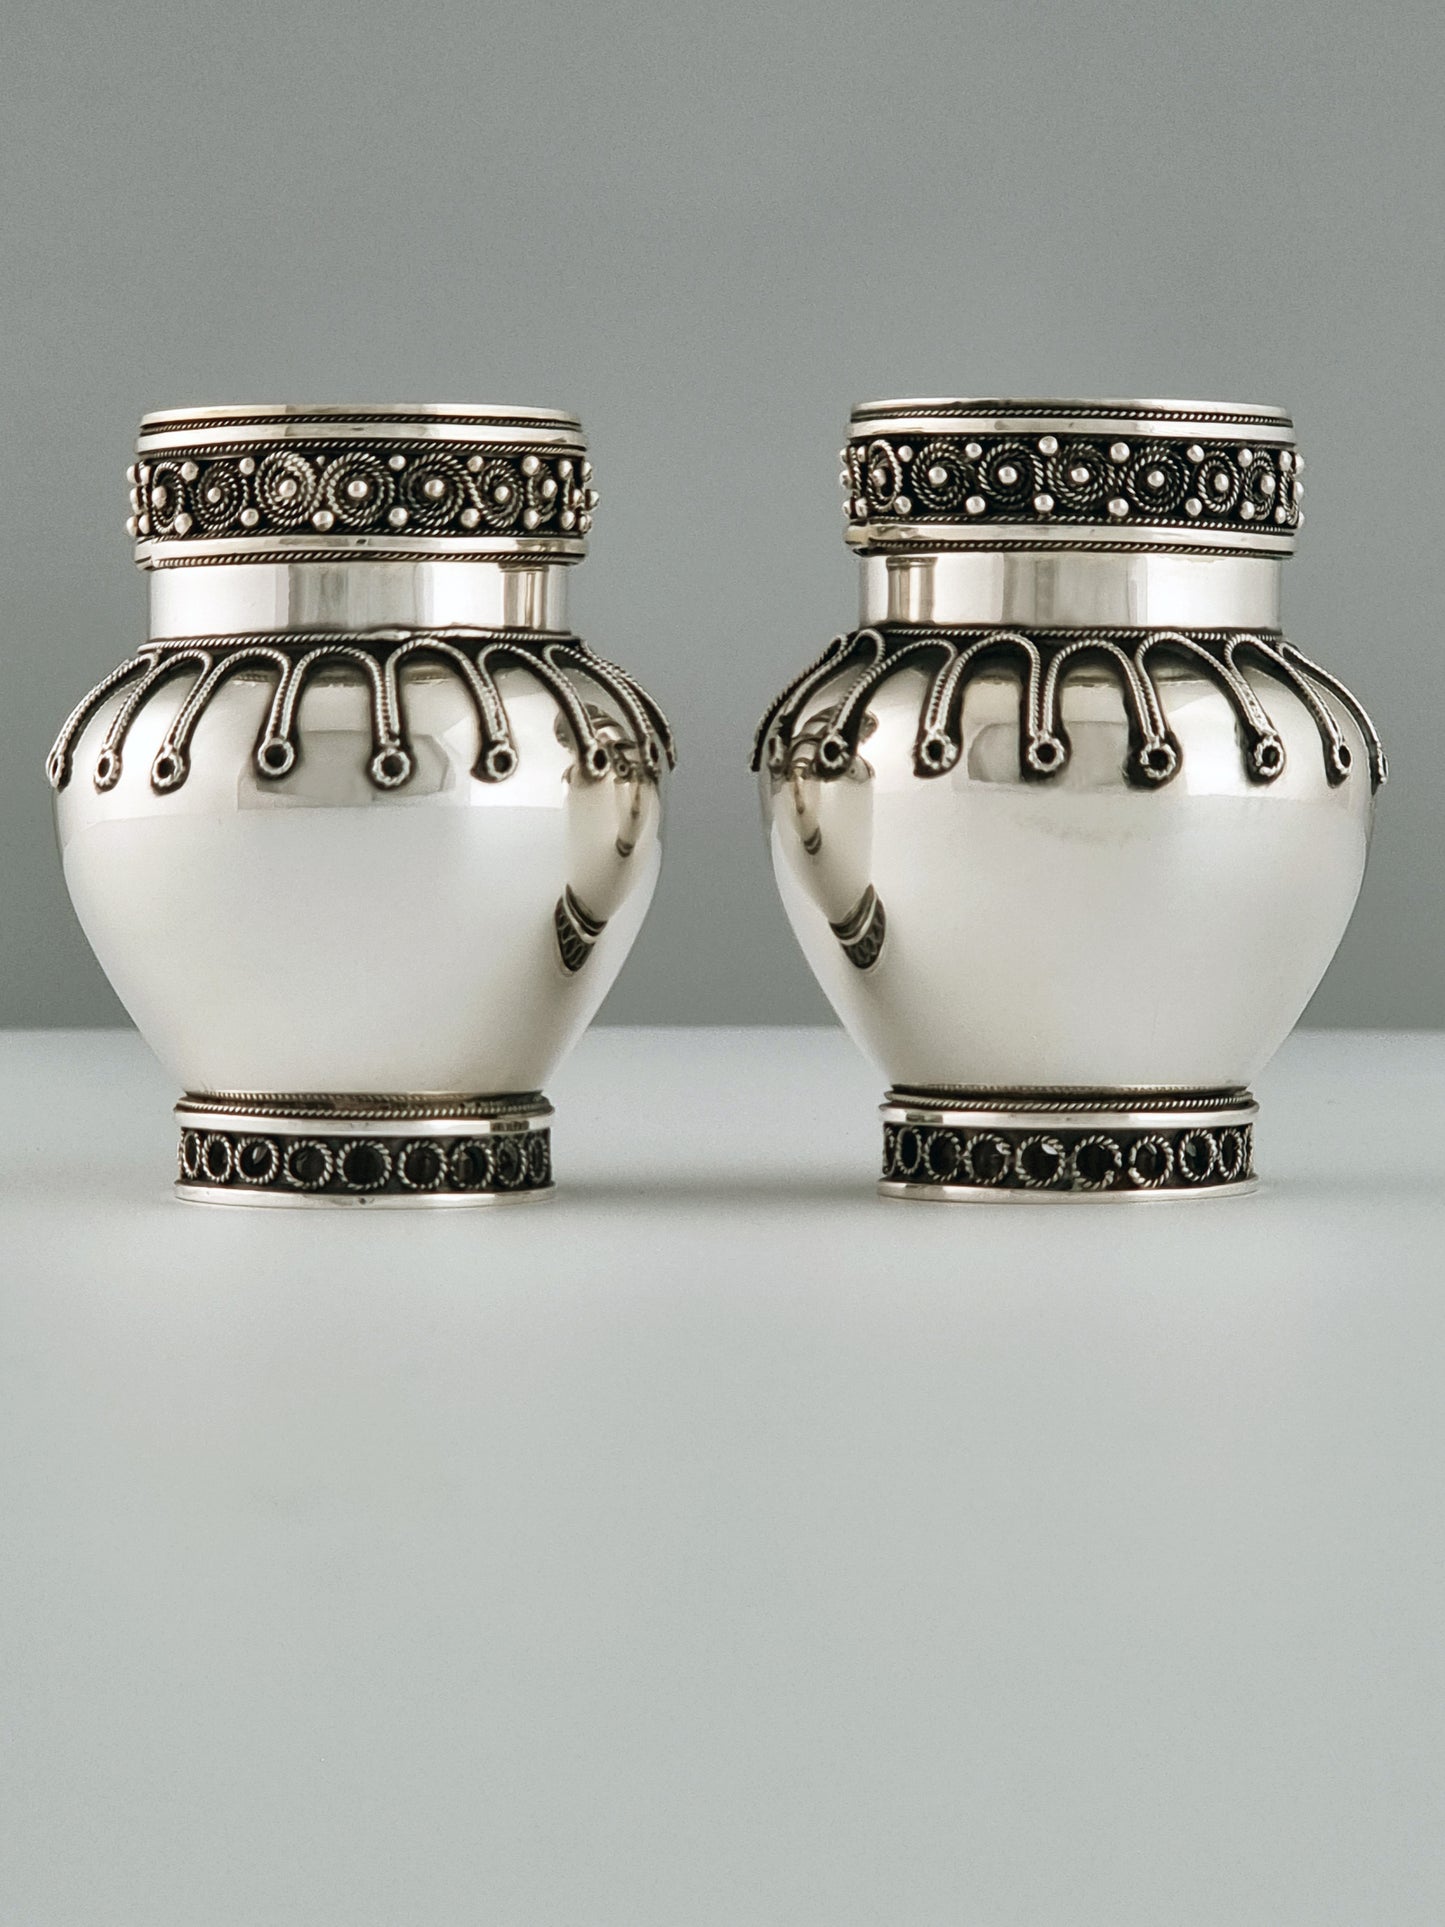 A pair of Yaacov Yemini's candlesticks smiling at each other.